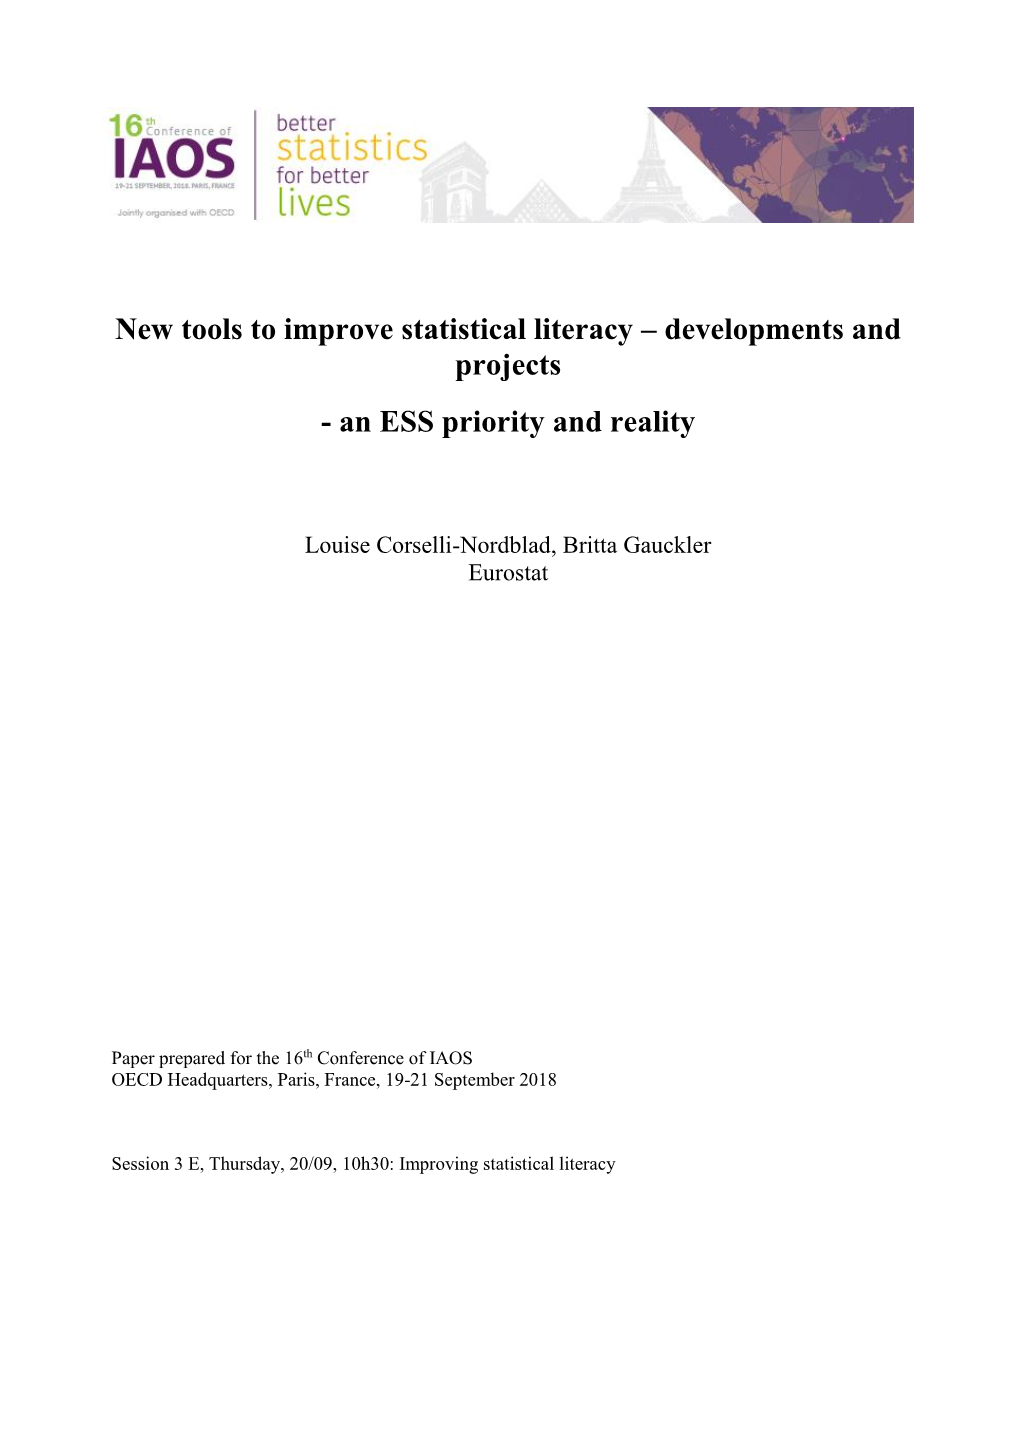 New Tools to Improve Statistical Literacy – Developments and Projects